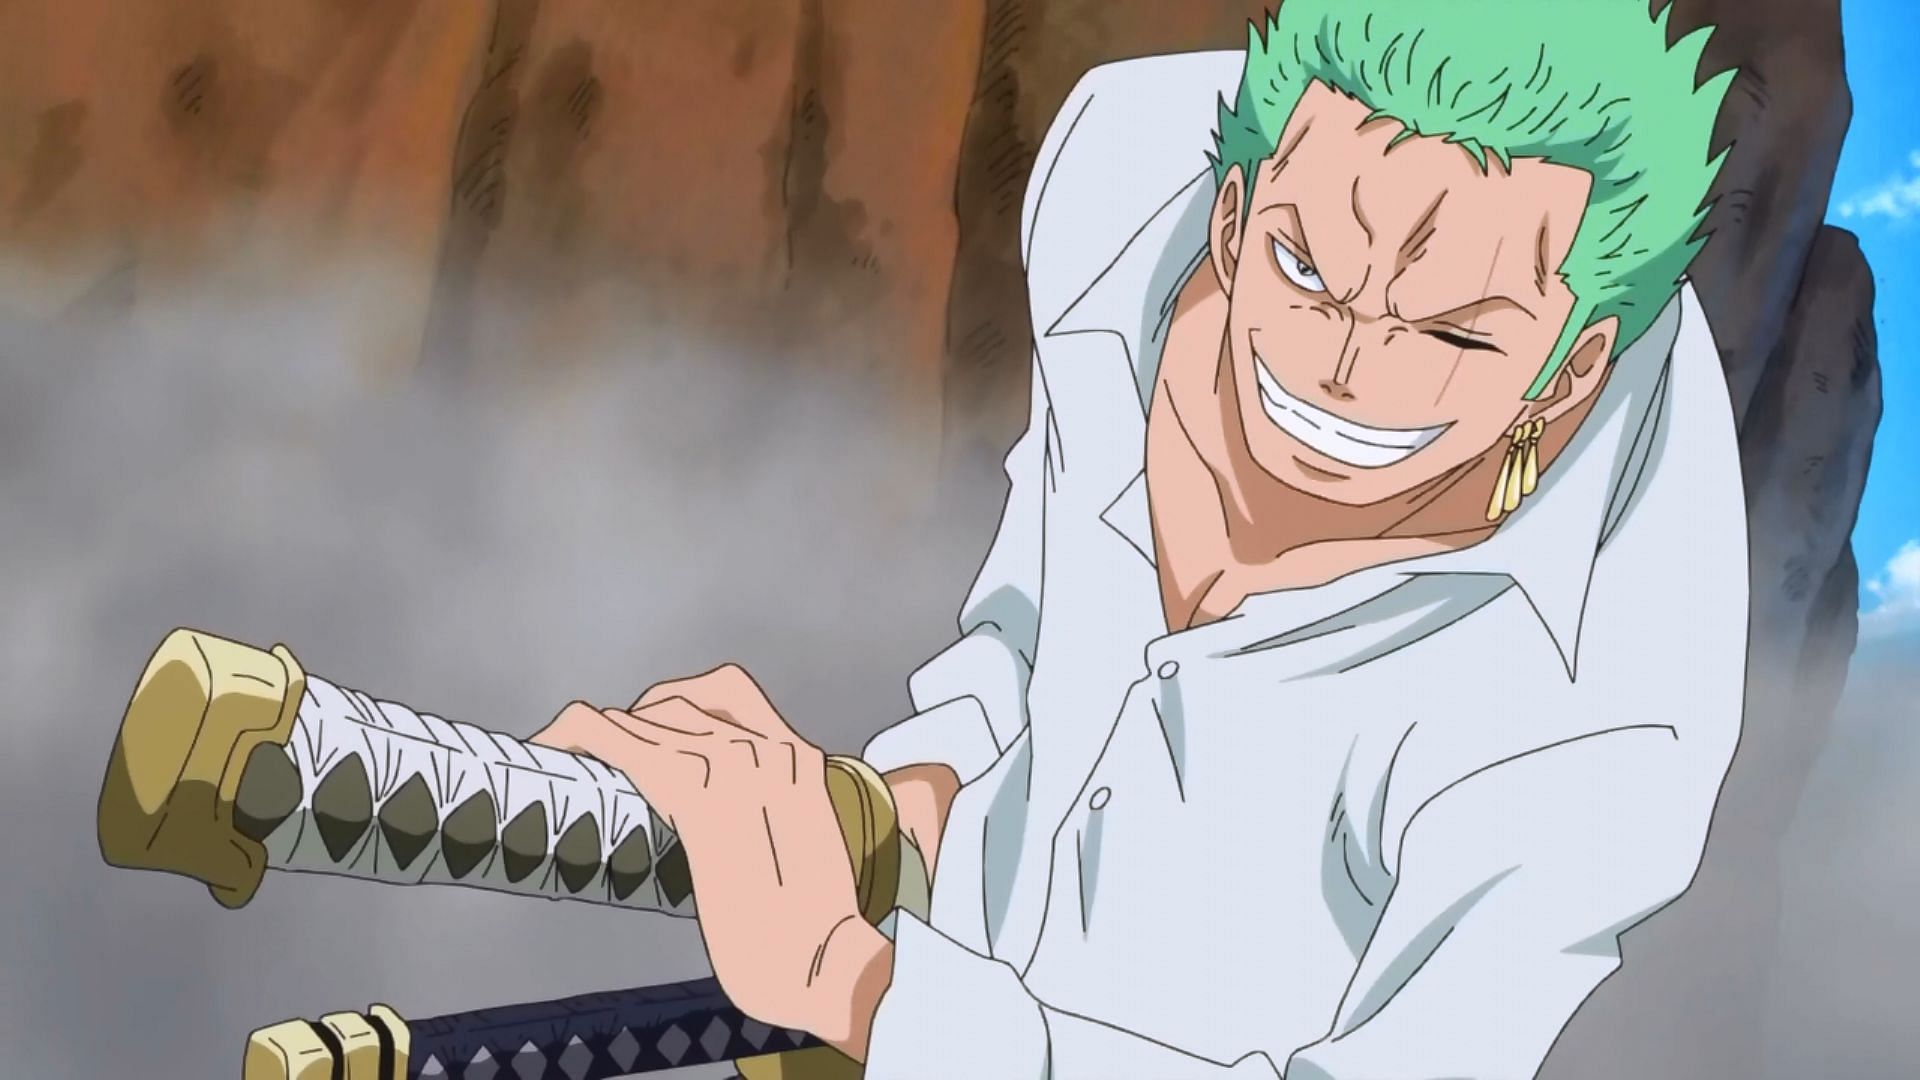 Zoro is a great example